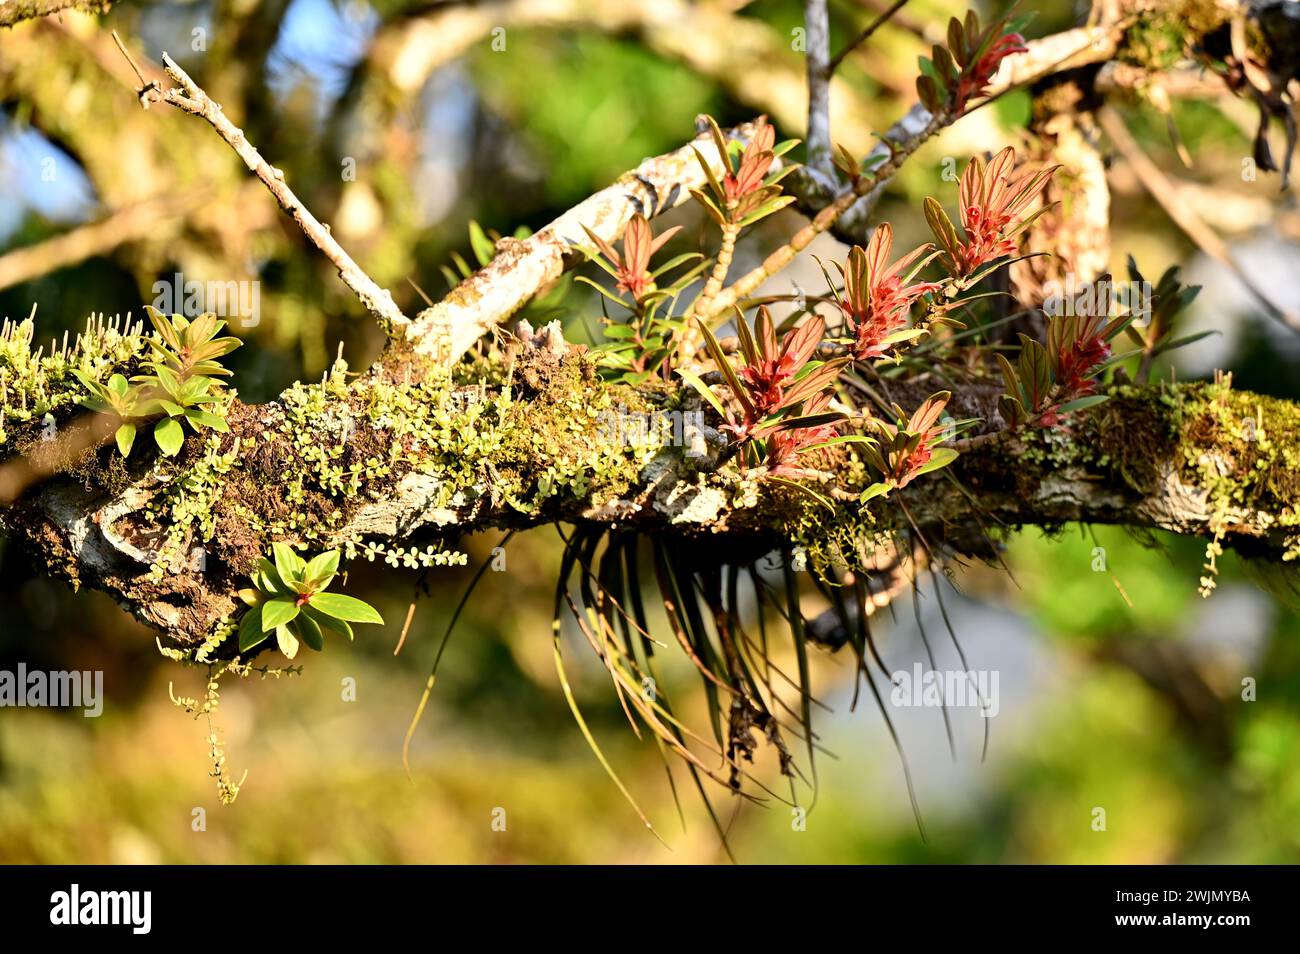 Natural view of epiphytes, also known as air plants, on a tree near Volcán Miravalles in Aluajuela Province, Costa Rica. Stock Photo